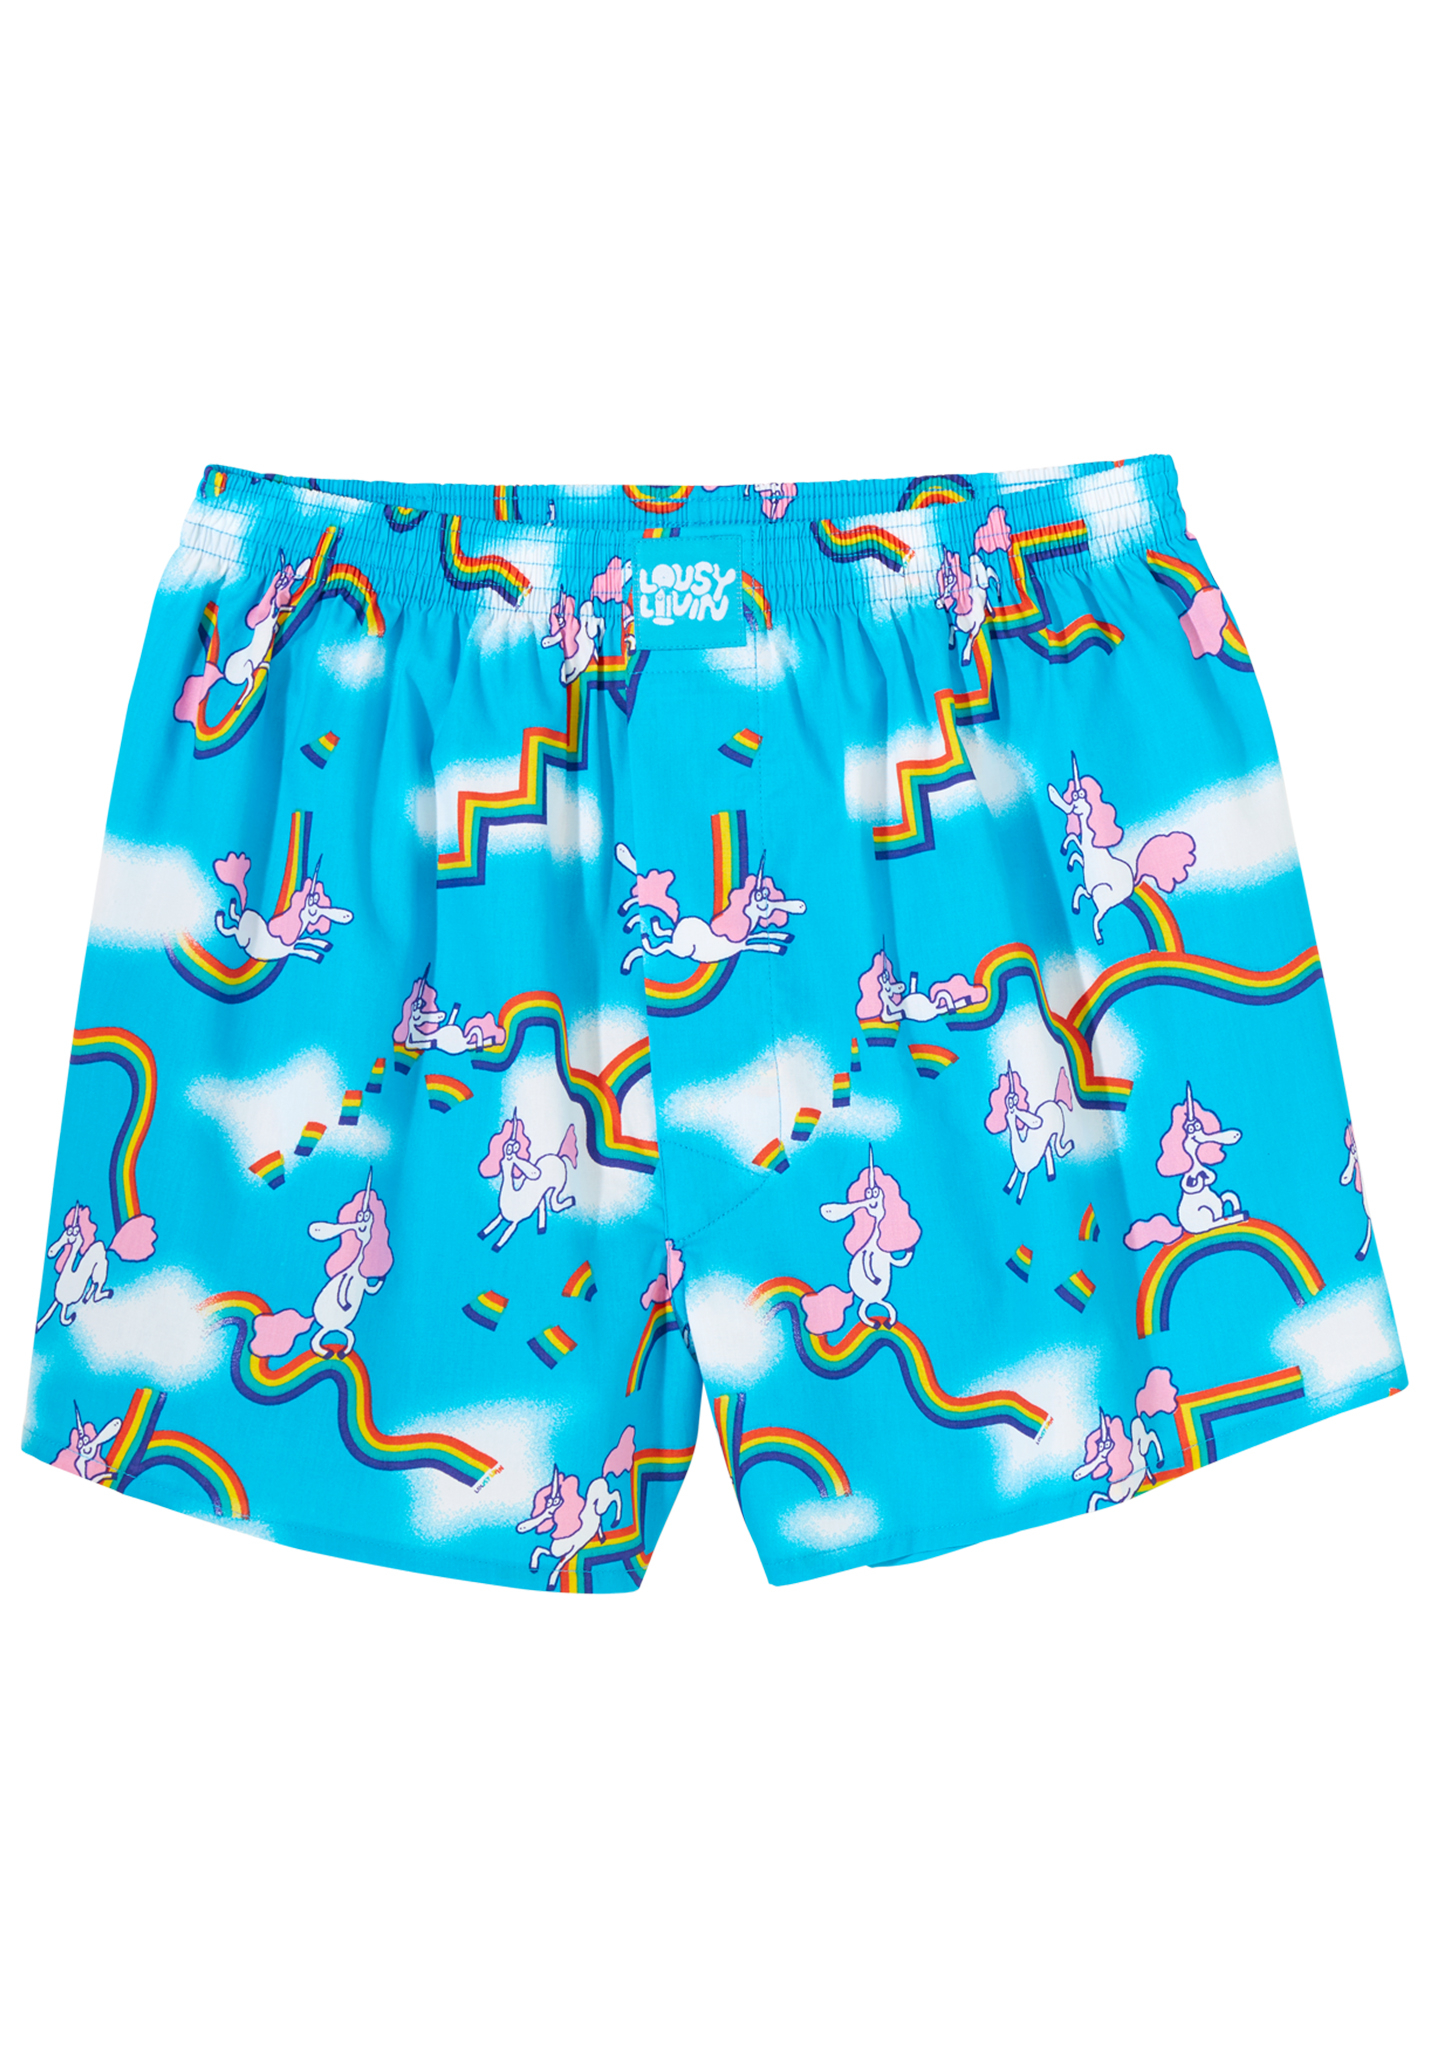 Lousy Livin Sky Gym Boxershorts blaues atoll S